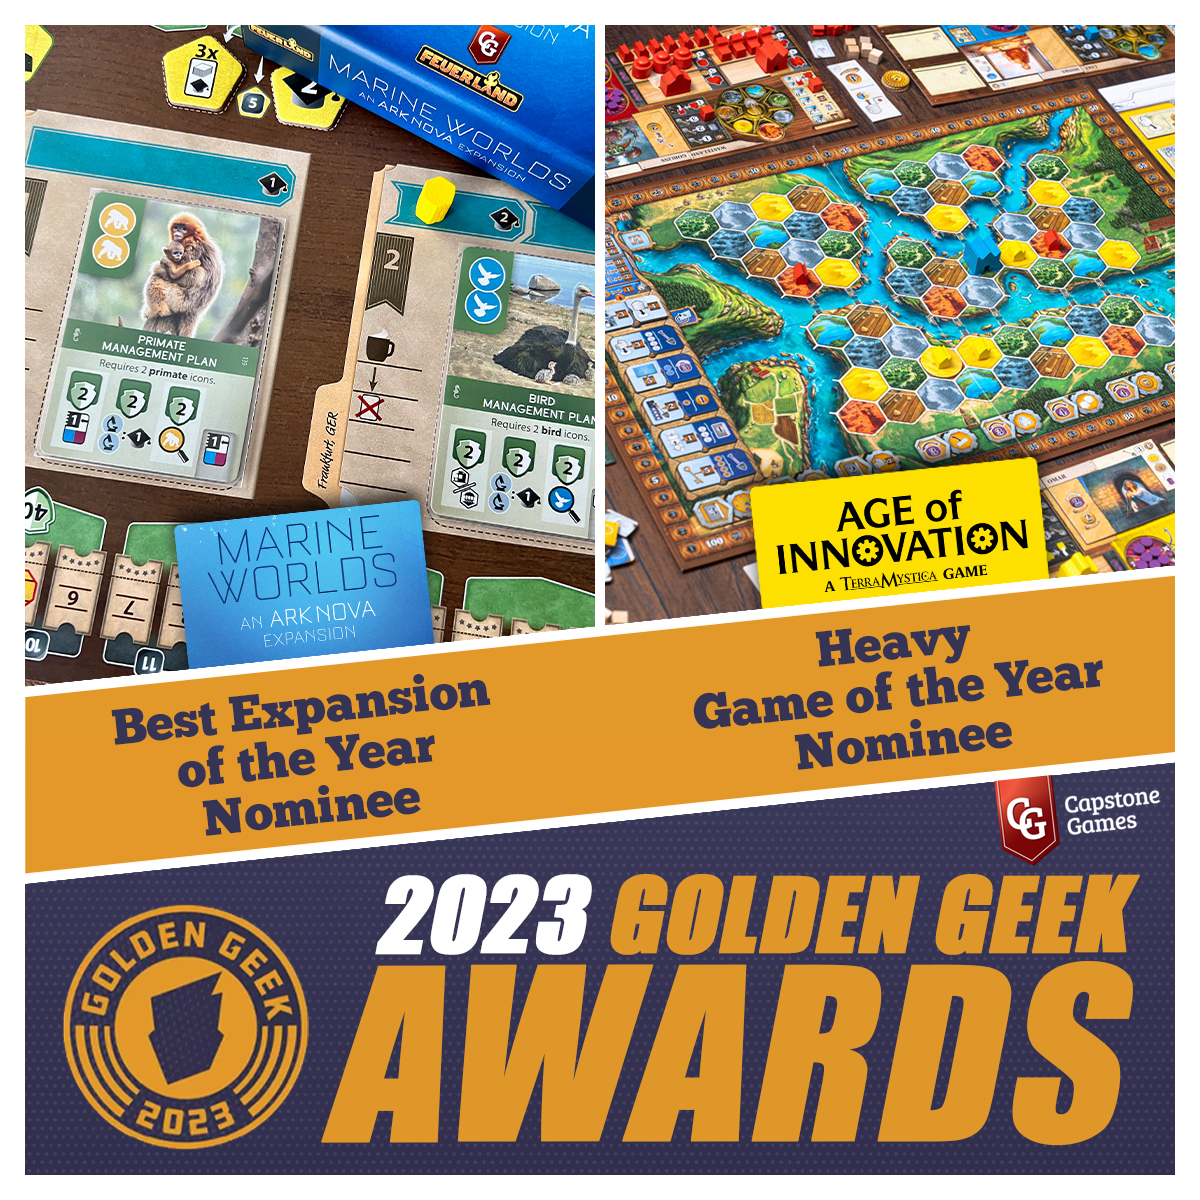 Voting for the BGG Golden Geek Awards ends this weekend, on Sunday May 12th! What Capstone games made it onto the final ballot? 🐡 Ark Nova: Marine Worlds - Best Expansion 🗺 Age of Innovation - Game of the Year, Heavy Strategy Cast your votes today! boardgamegeek.com/geekawards/boa…